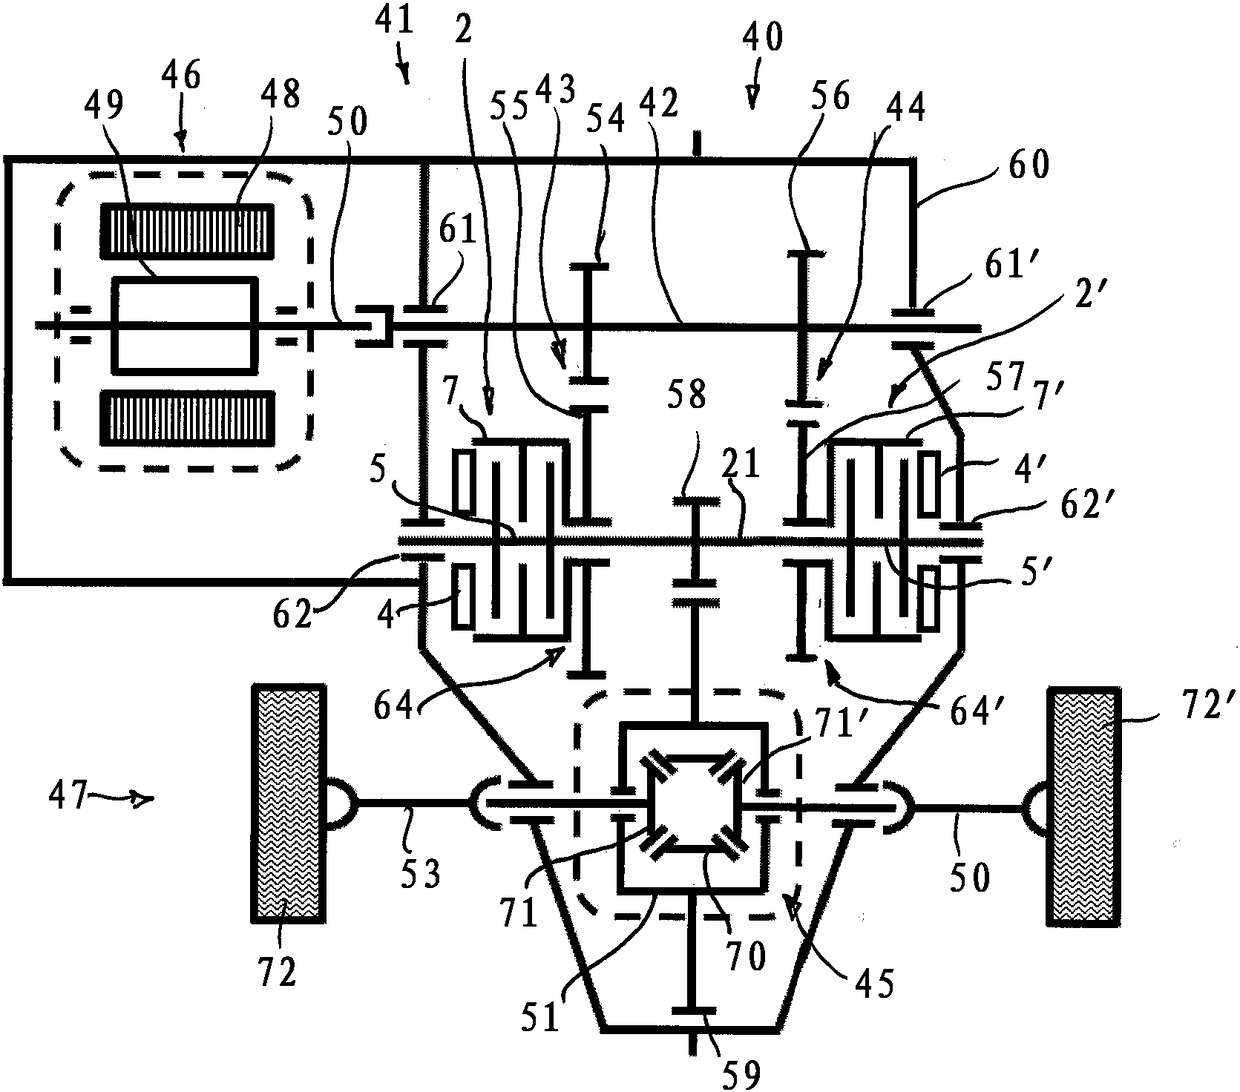 Clutch assembly for a drive train and gear system comprising such a coupling assembly